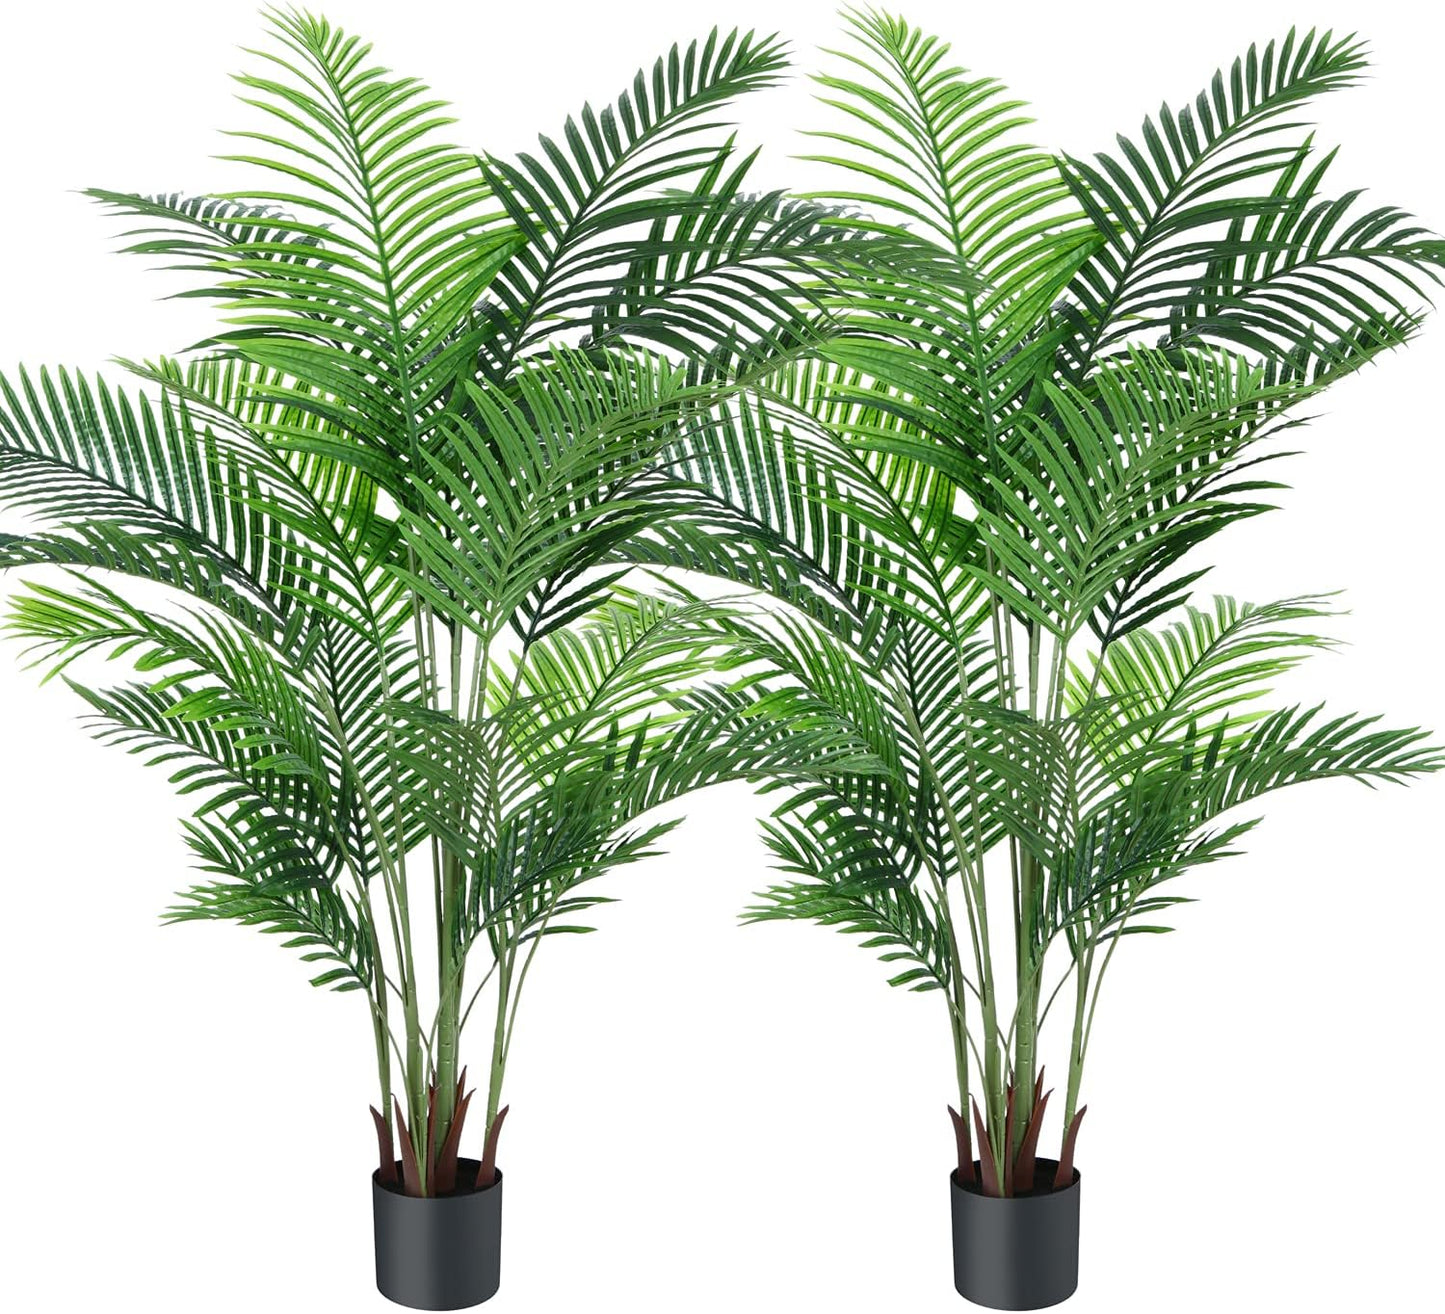 Fopamtri Artificial Areca Palm Plant 6 Feet Fake Palm Tree with 20 Trunks Faux Tree for Indoor Outdoor Modern Decoration Feaux Dypsis Lutescens Plants in Pot for Home Office, 2 Pack